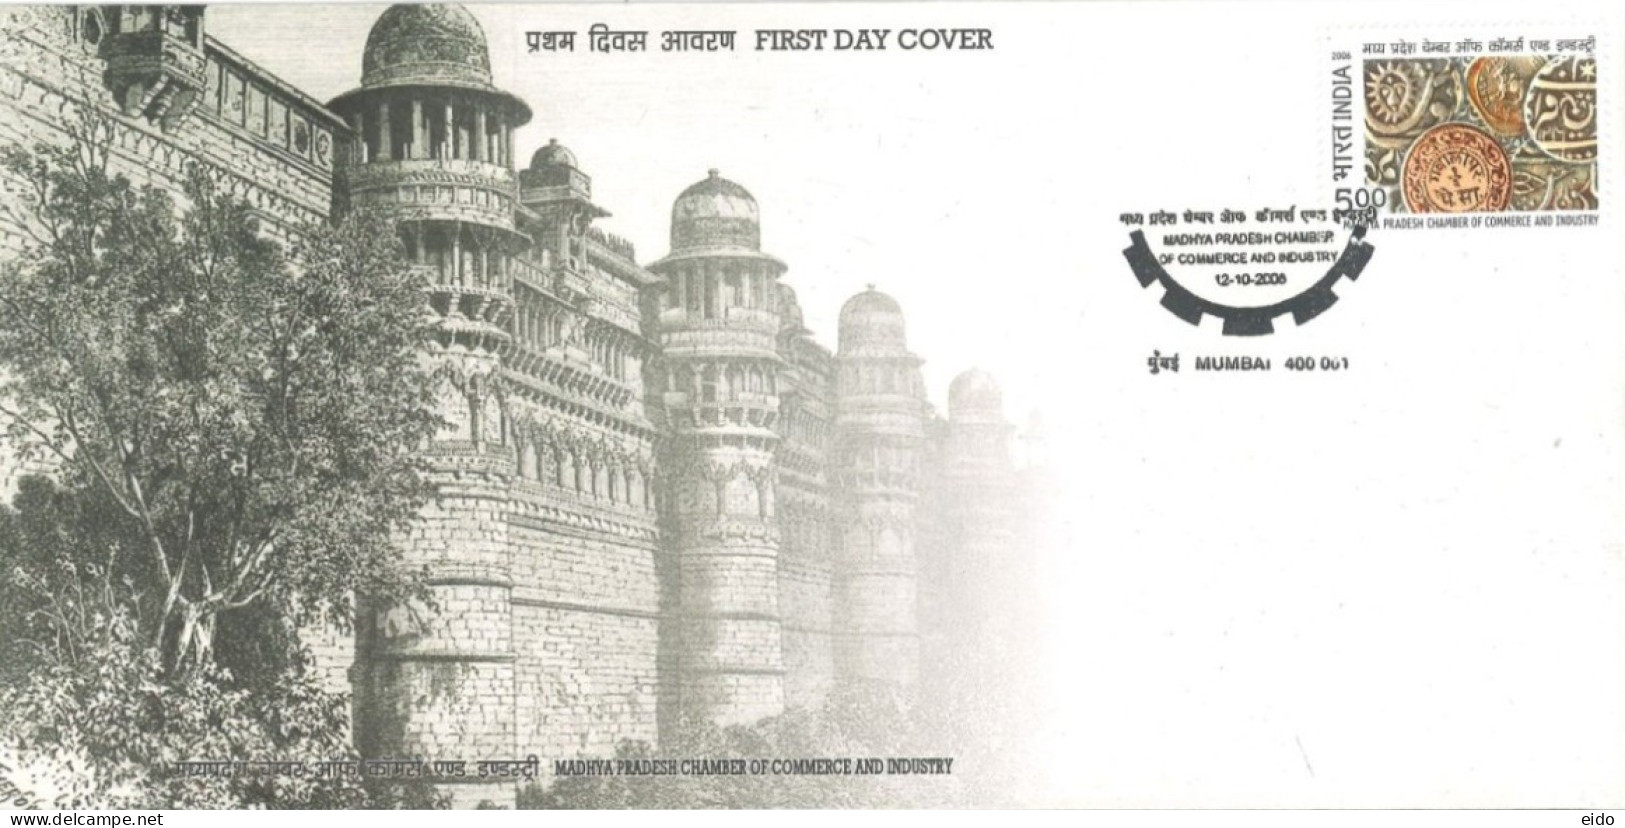 INDIA - 2006 - FDC STAMP OF MADHYA PRADESH CHAMBER OF COMMERCE AND INDUSTRY. - Storia Postale